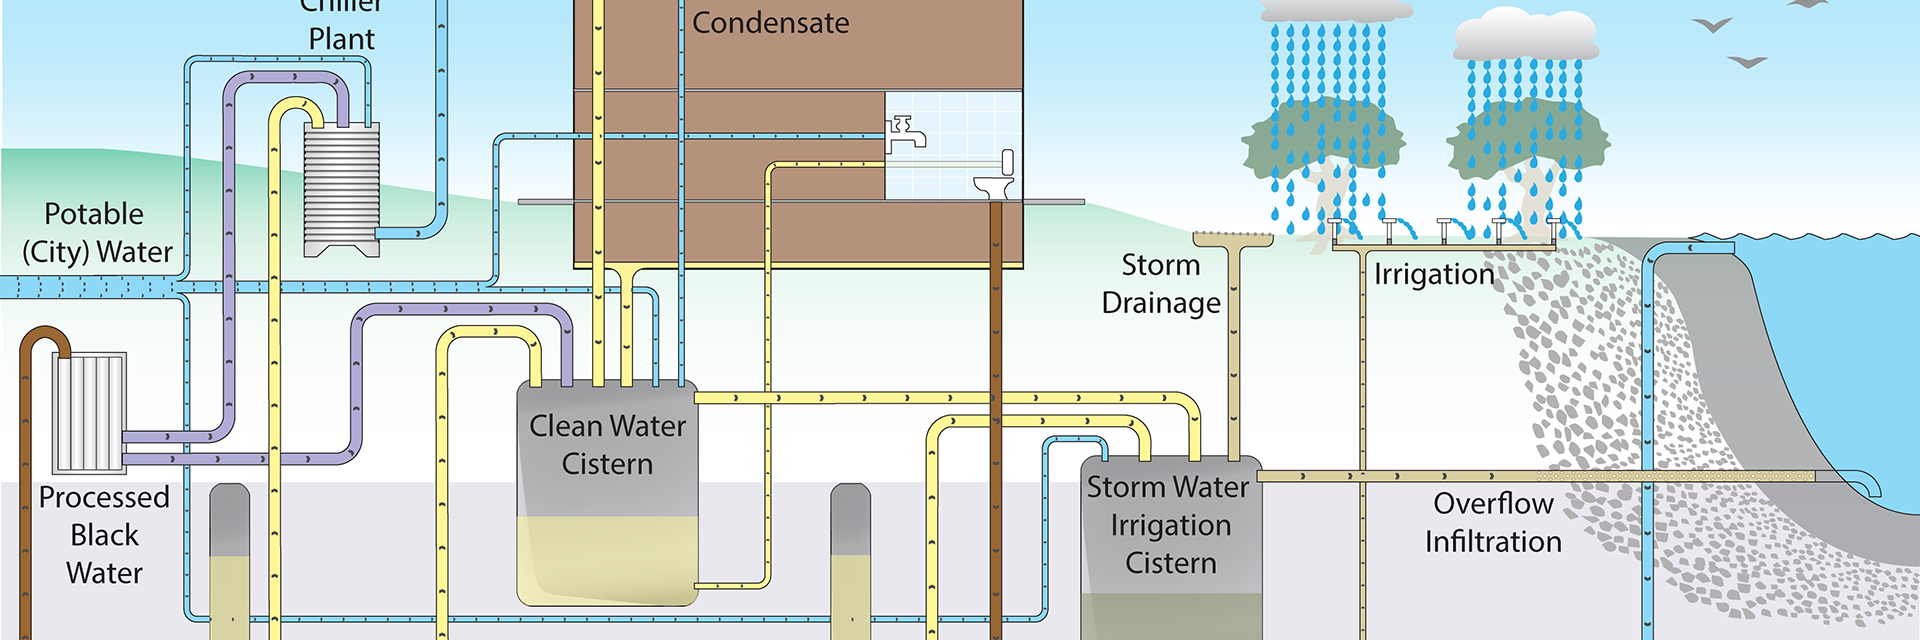 storm water graphic 